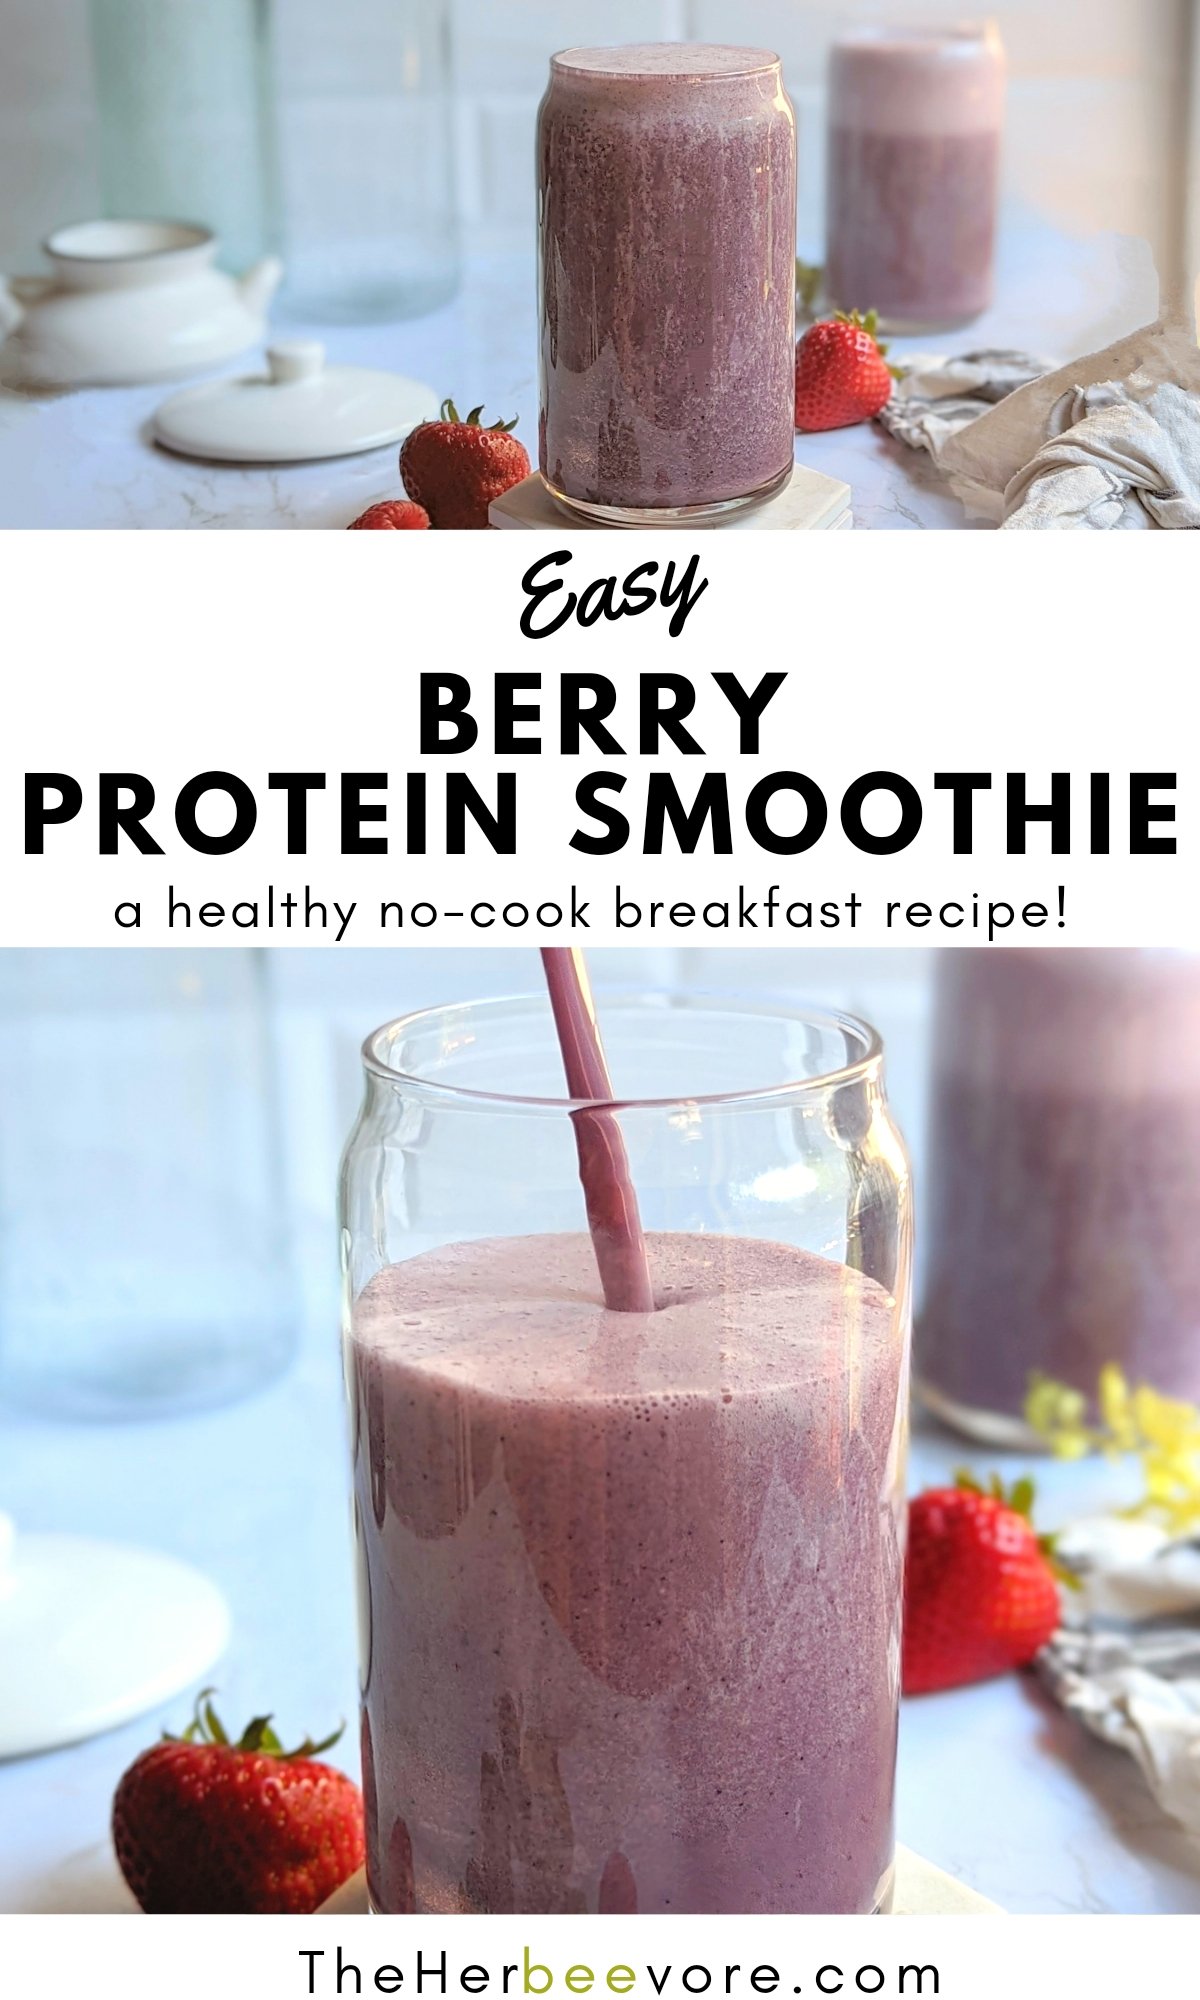 berry protein smoothie recipe healthy vegan gluten free protein smoothie with blueberries strawberries and raspberries